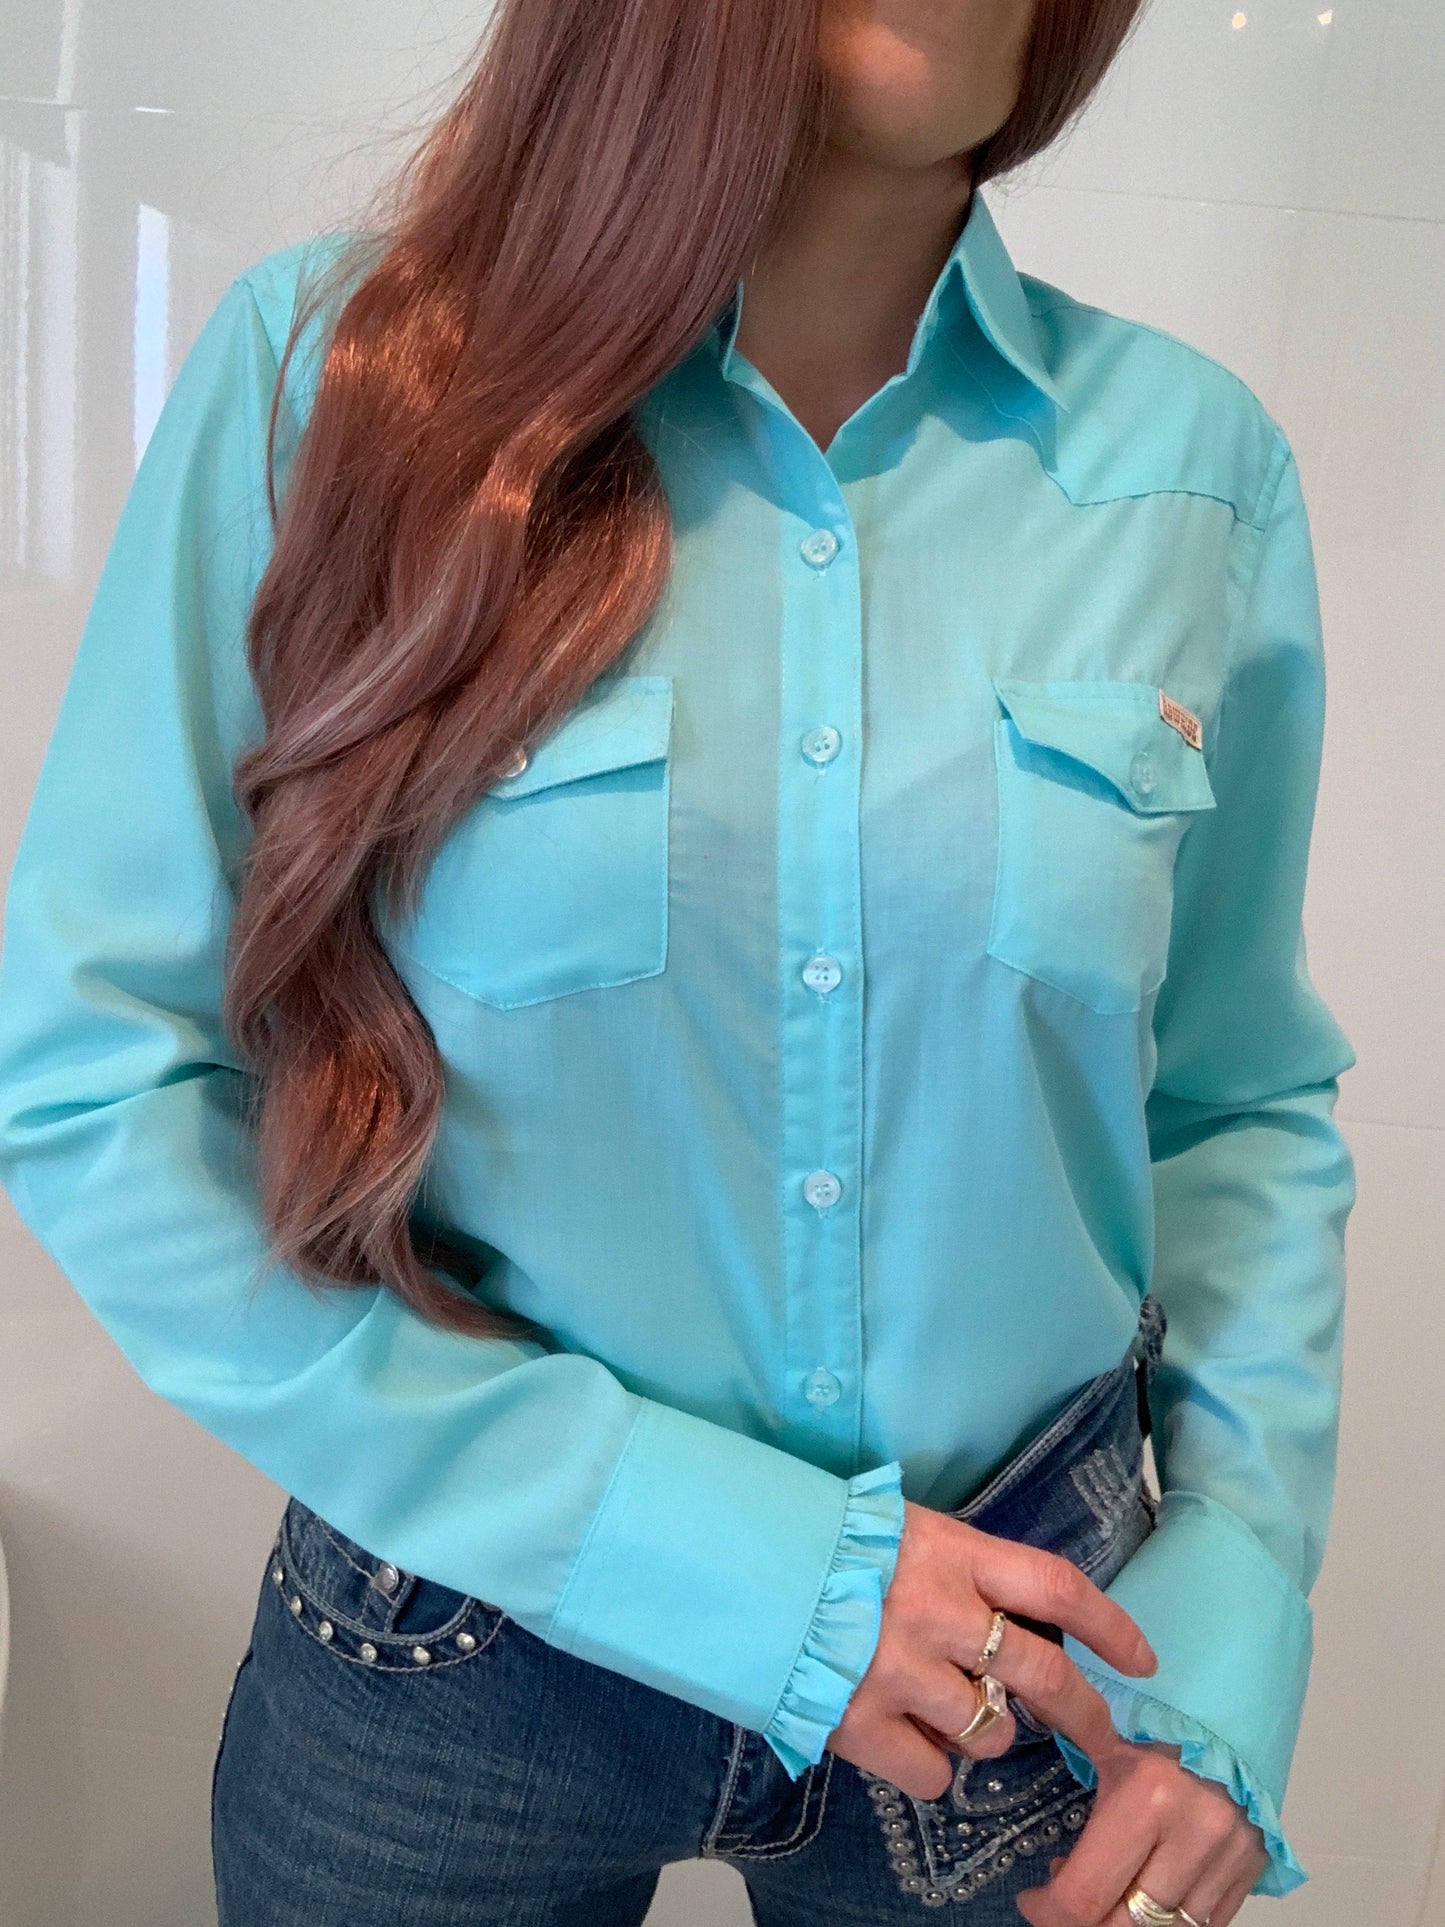 L1326 - Alanis Ladies Plain Peppermint Shirt with Frills - Rawhide Western Wear 